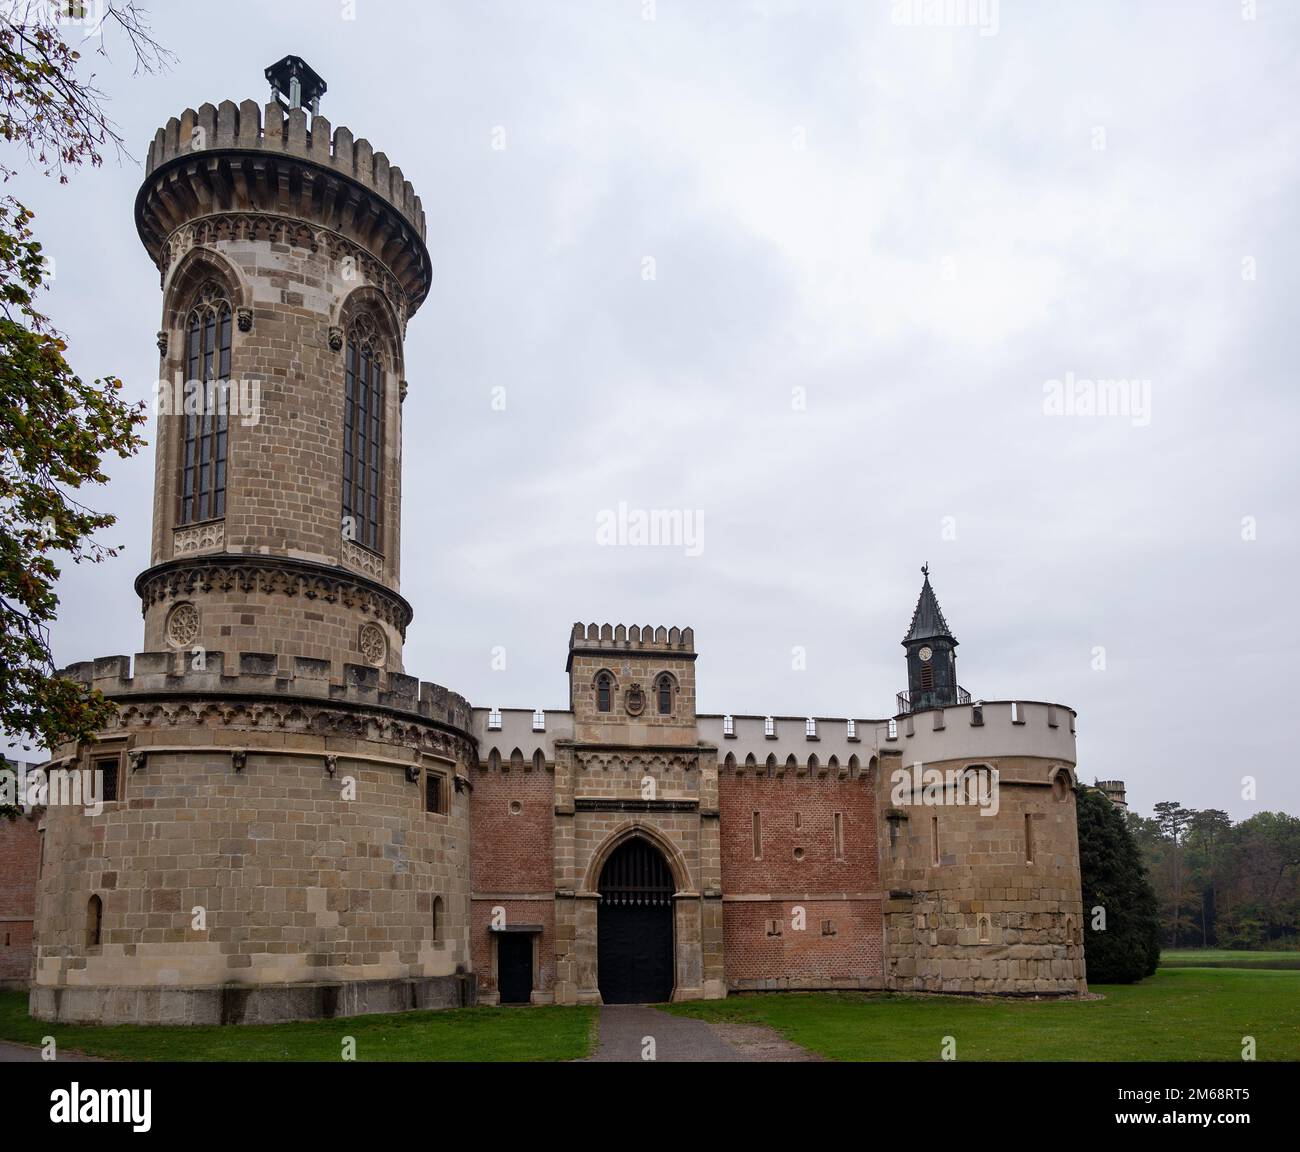 15th october,2022,Laxenburg, Austria. View of the Laxenburg castle at the town of Laxenburg, Austria. Stock Photo